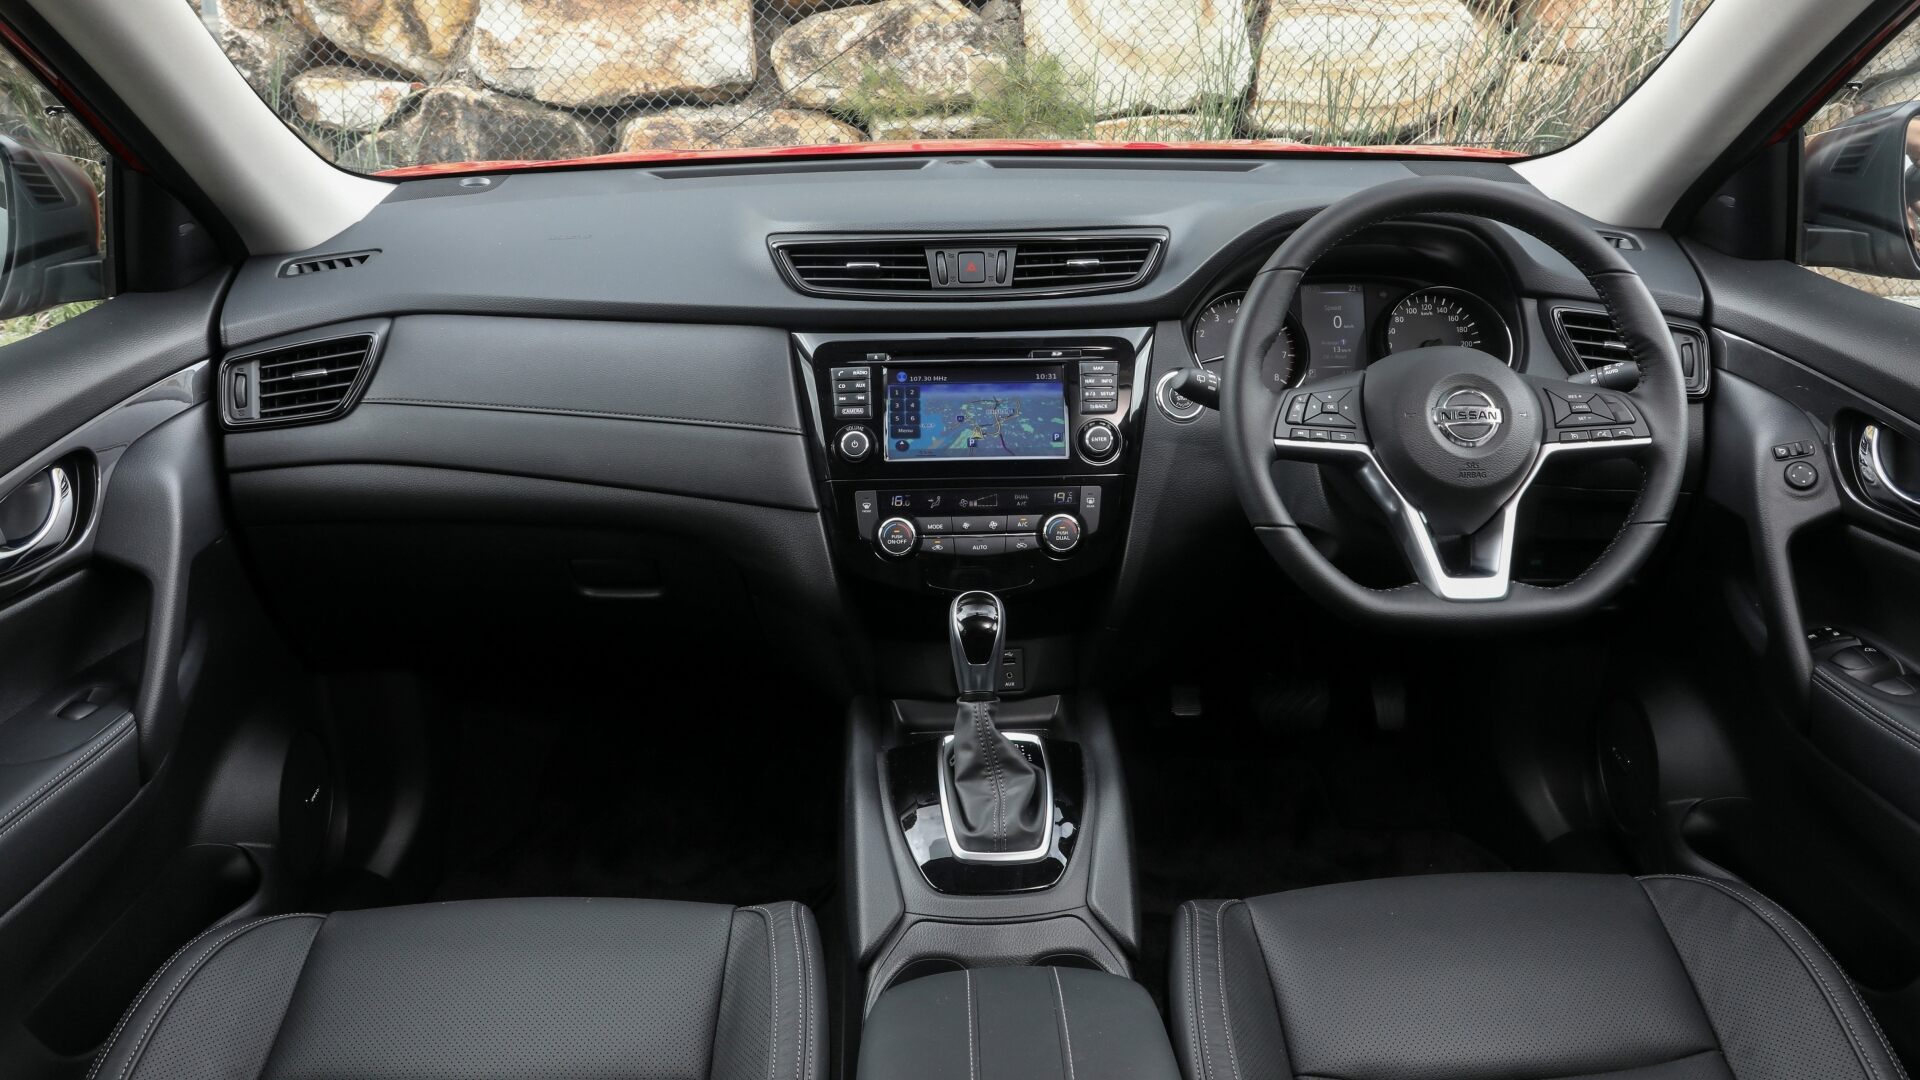 The Interior, Steering, Dashboard, And Central Console Of A Nissan X-Trail N-Trek (Credits Nissan Australia Newsroom)